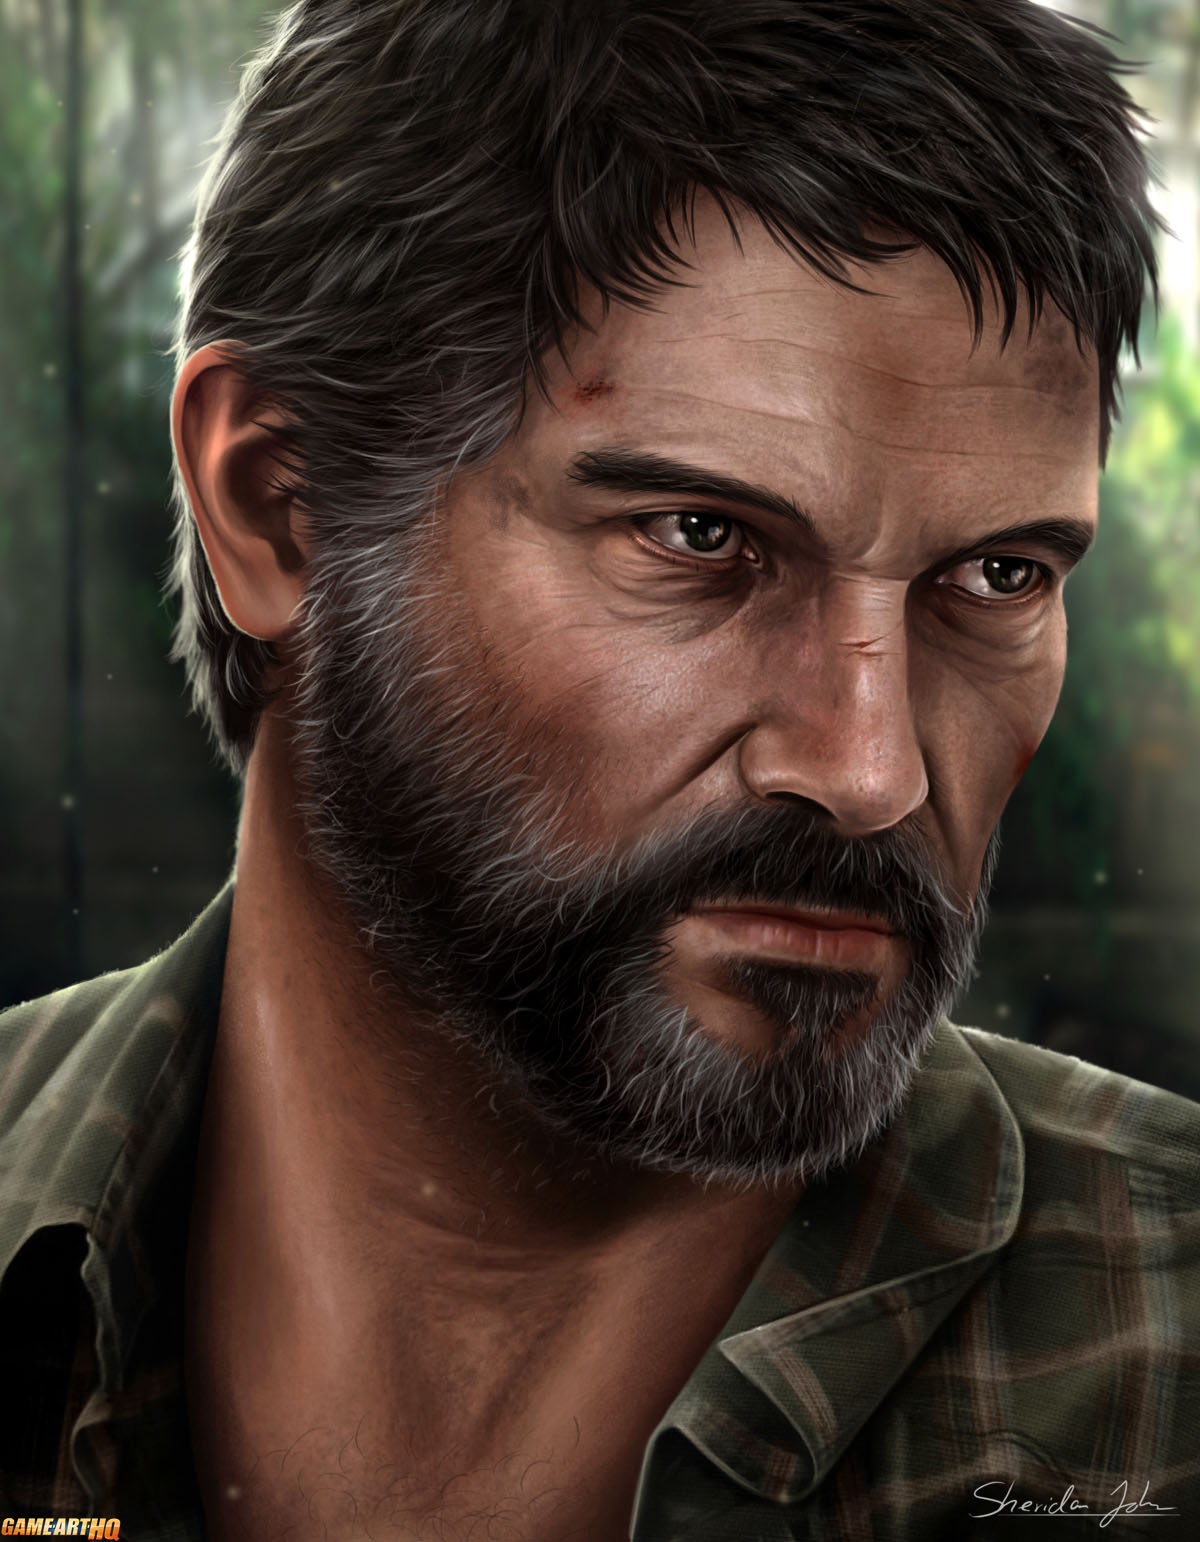 Joel from The Last Of Us by Sheridan Johns